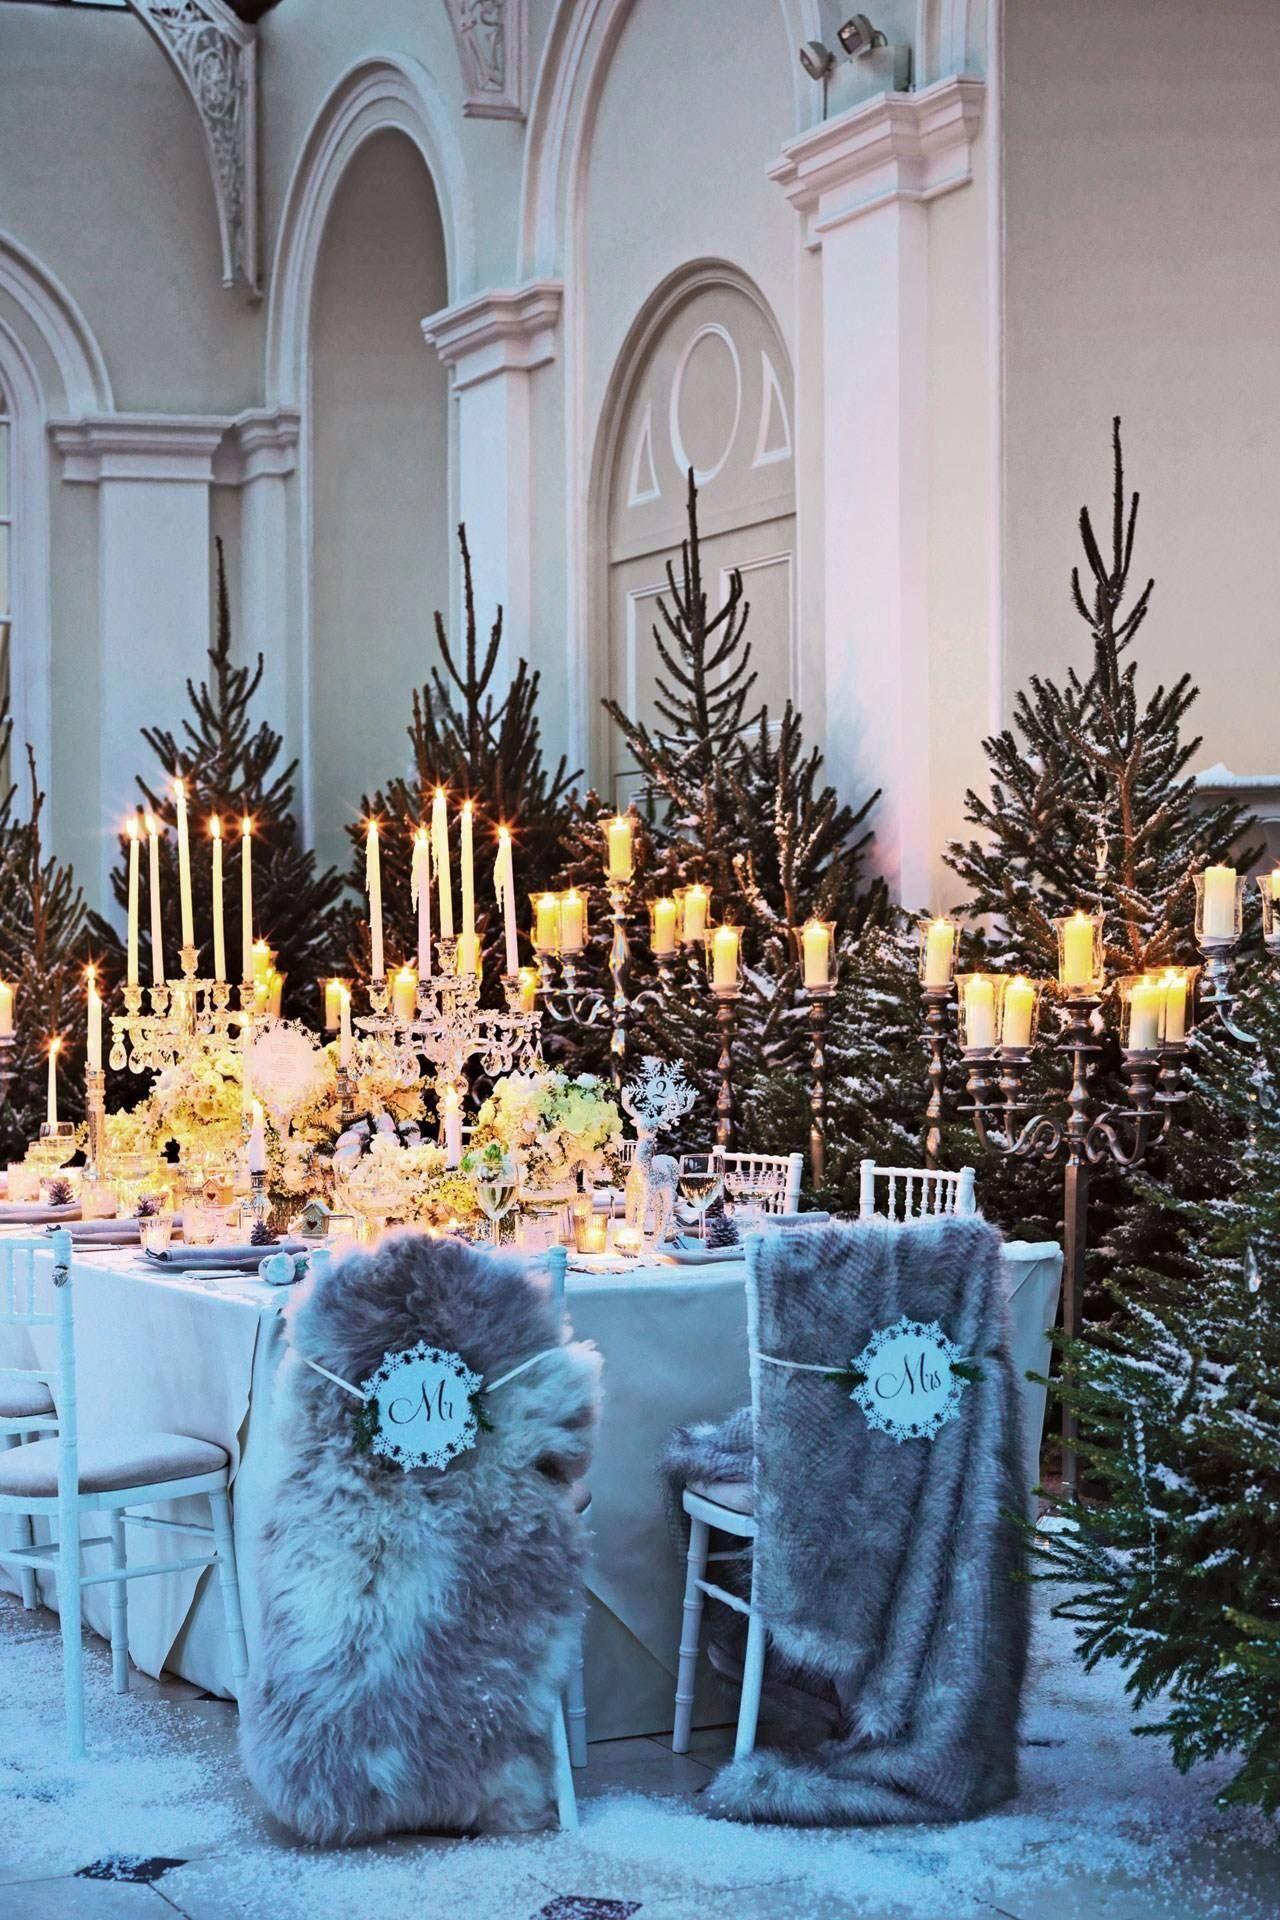 77 Festive Christmas Wedding Ideas to Transform Your Day - hitched.co ...